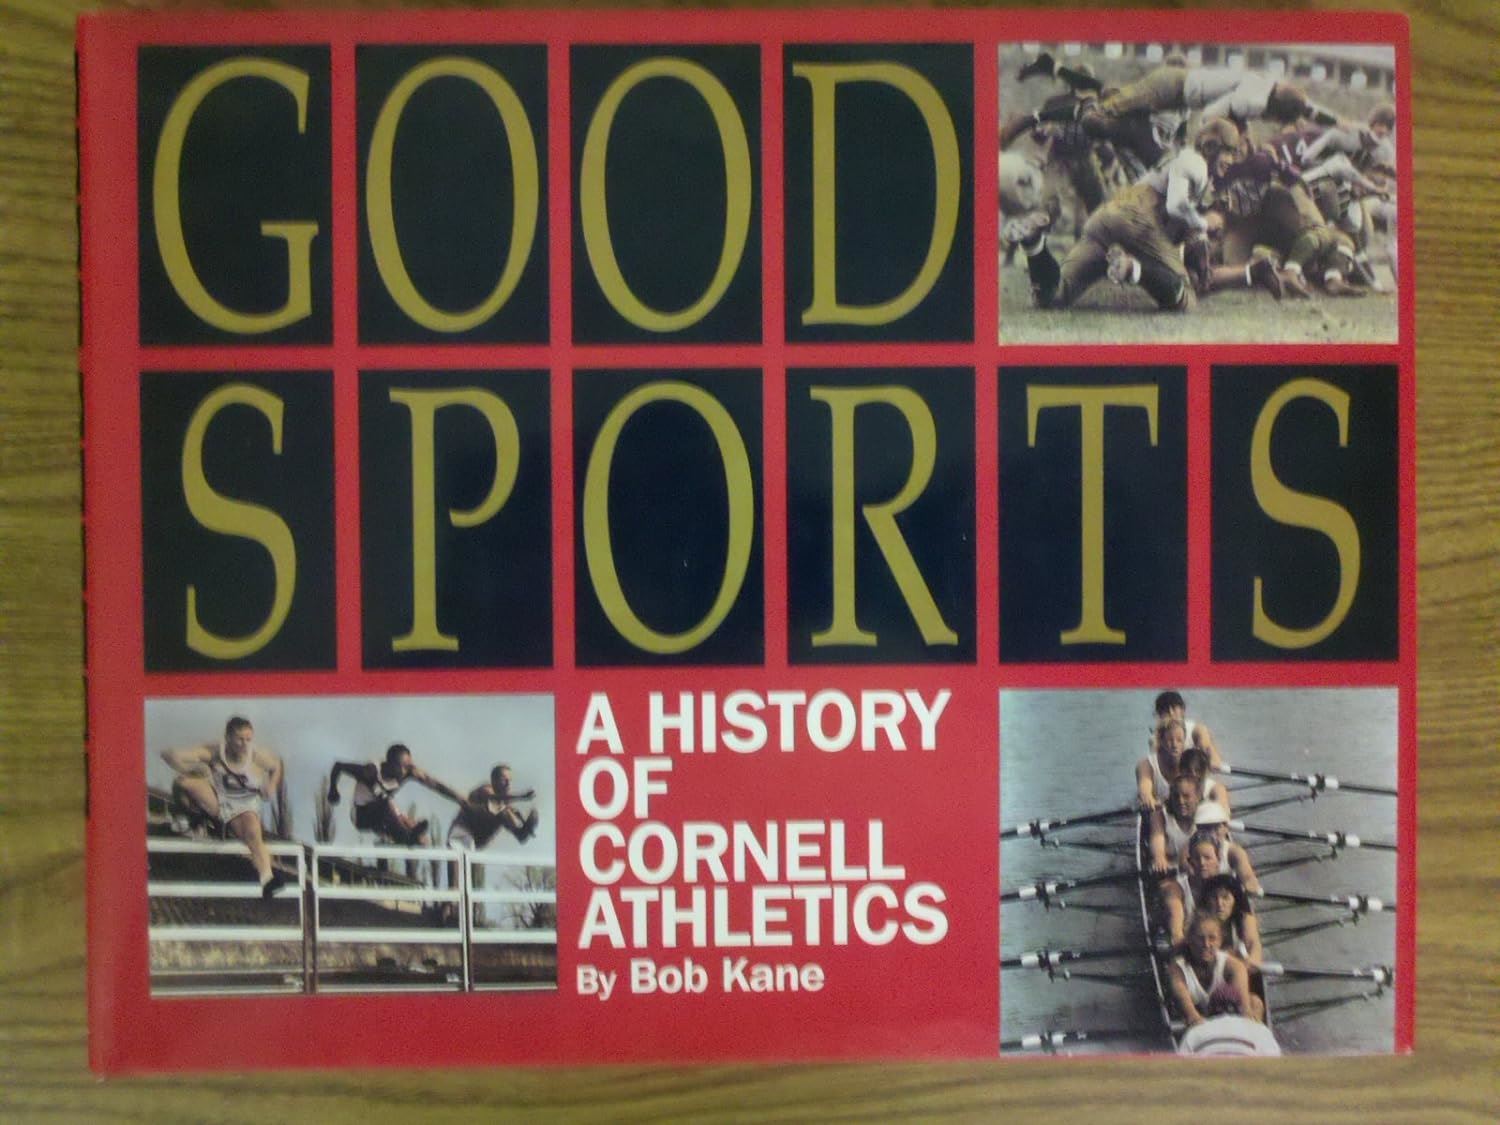 Book cover reading “Good Sports” written by Bob Kane. The cover includes three older images, one of a rowing meet, another of a hurdles race, and the last of a football game.